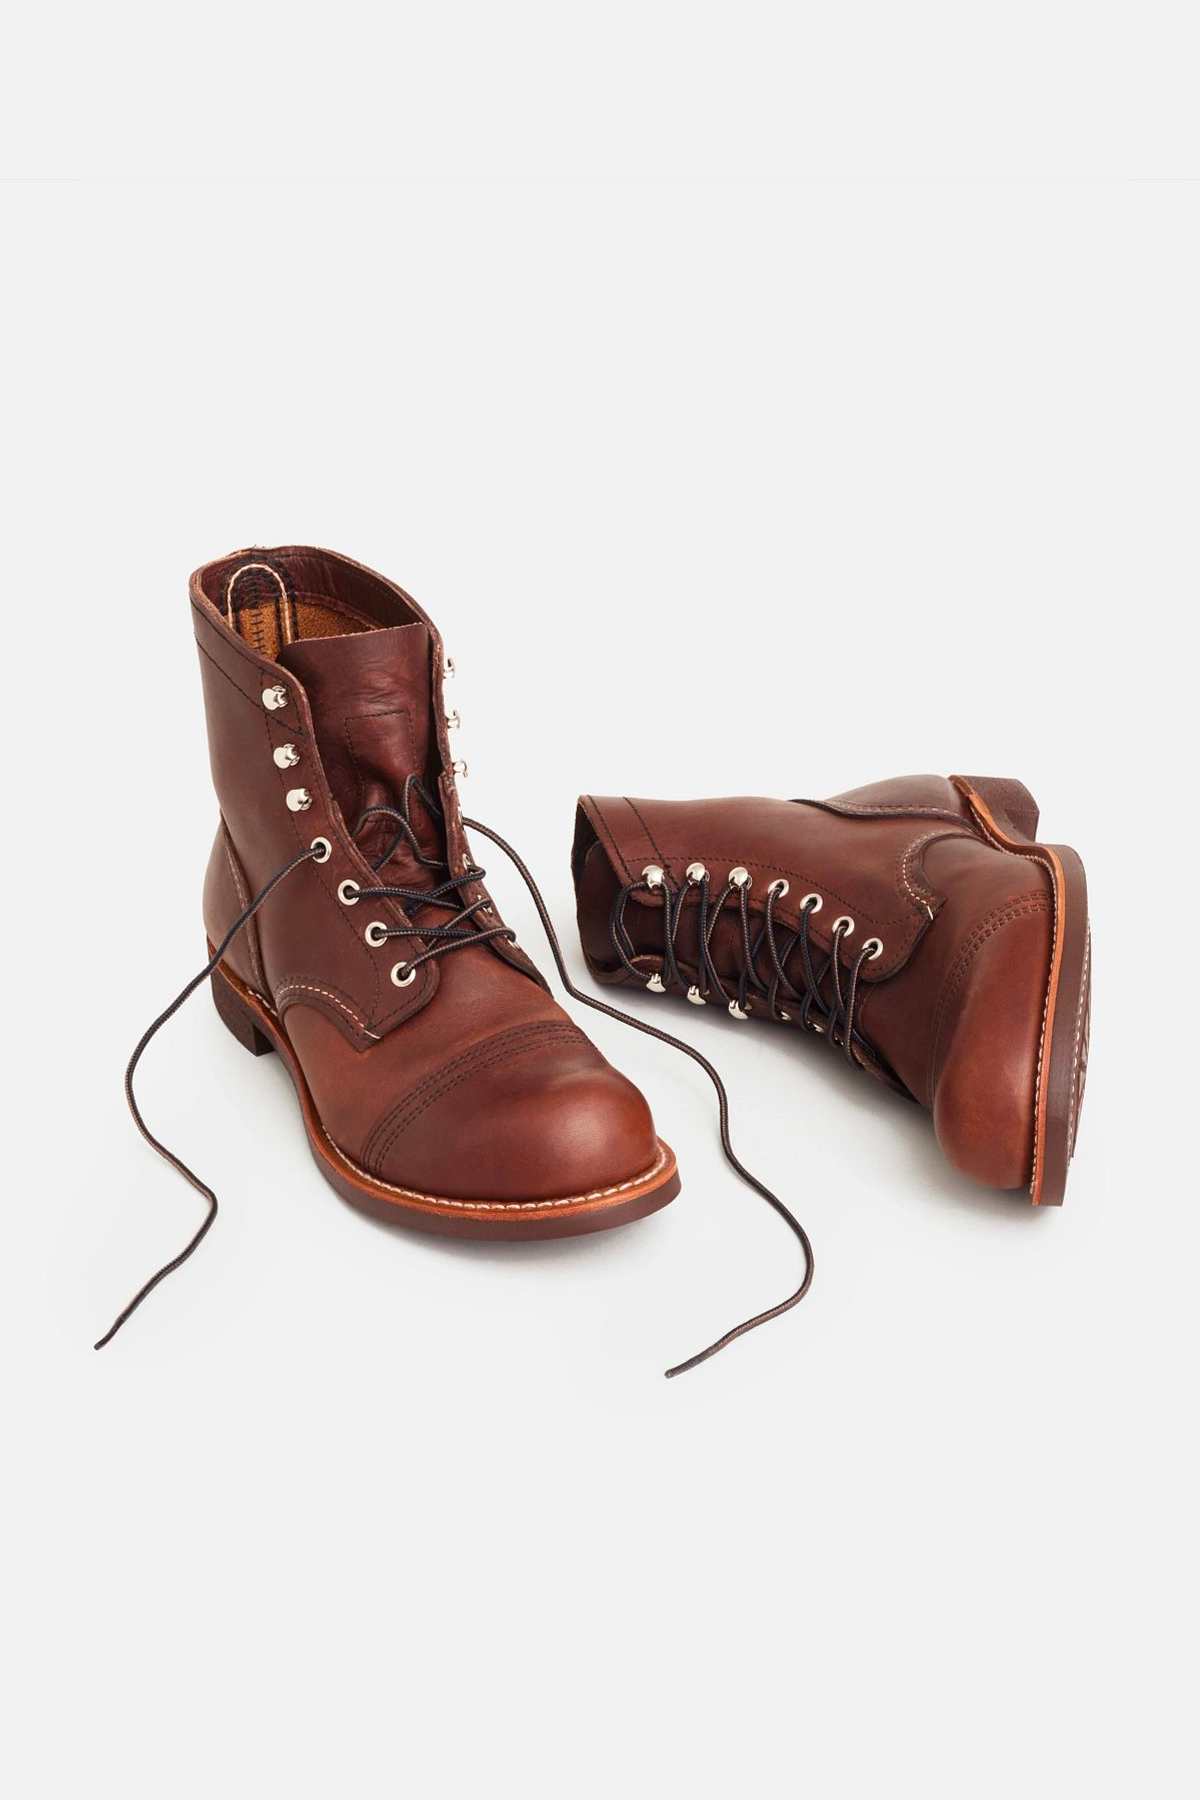 Men's Red Wing Heritage Iron Ranger in Amber Harness